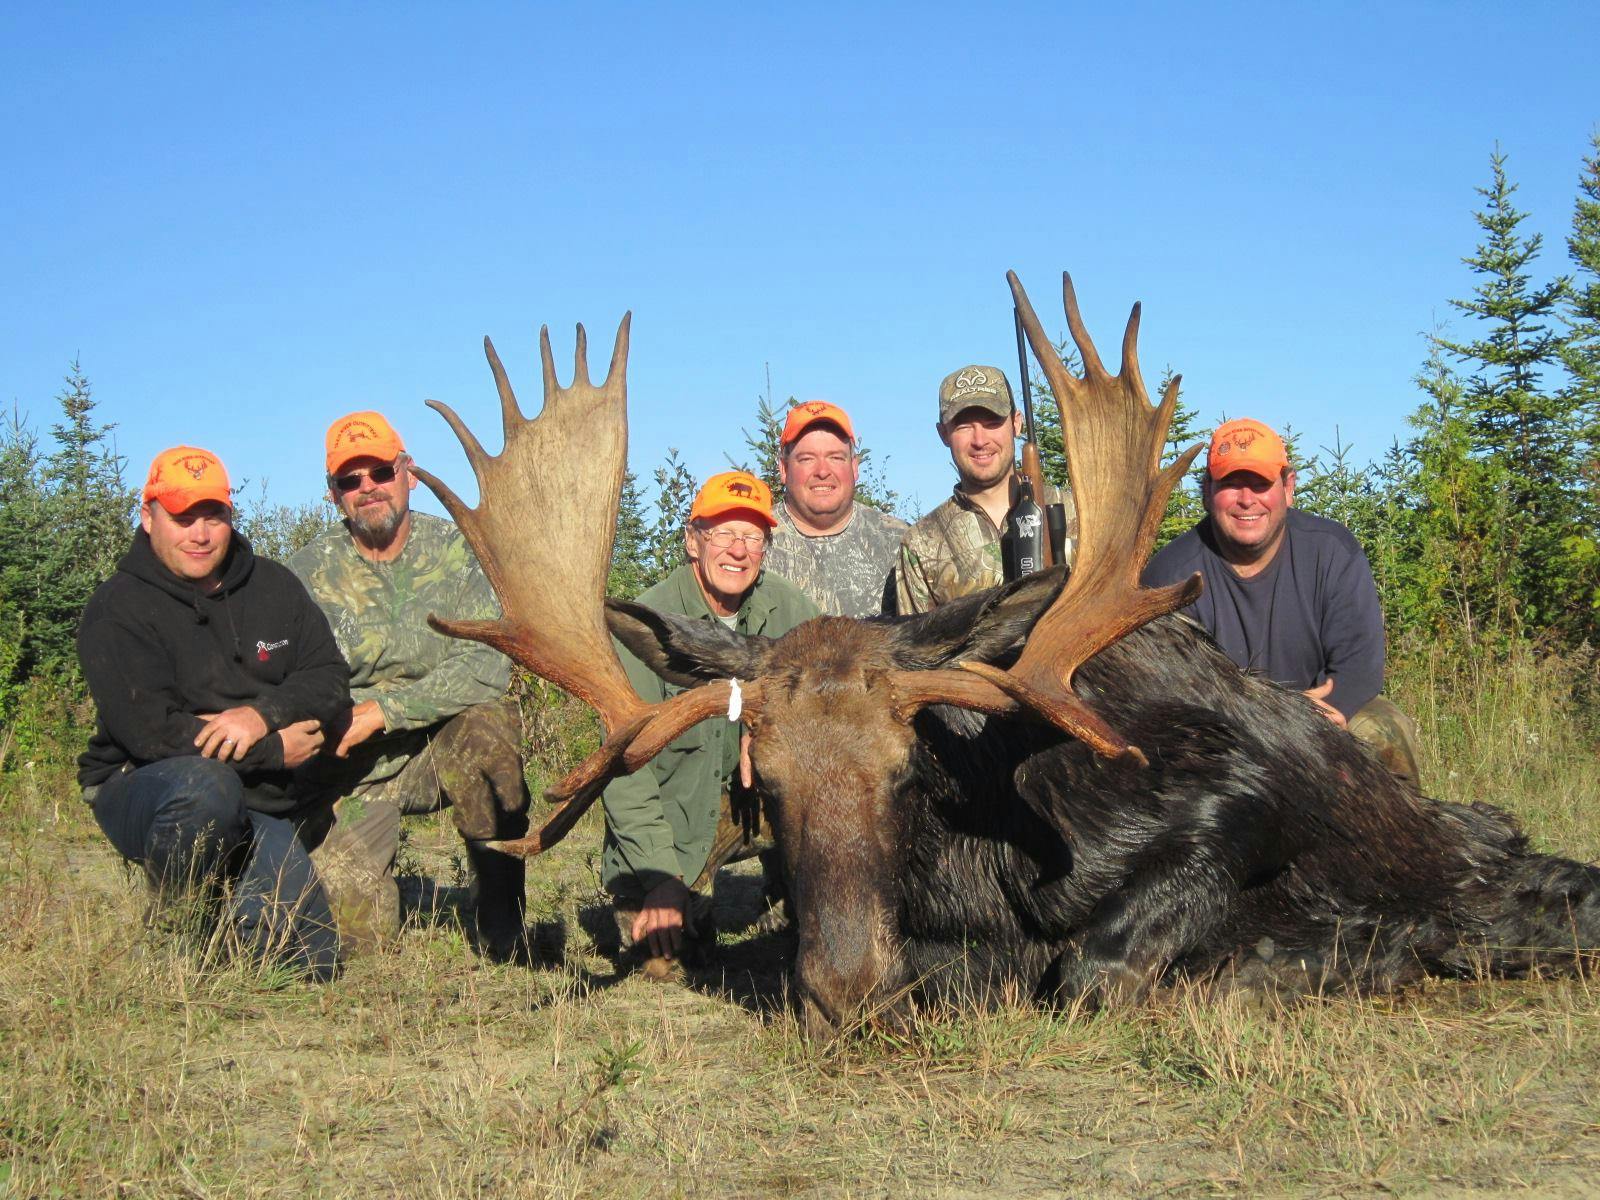 Image of a group of men sitting around an animal they hunted